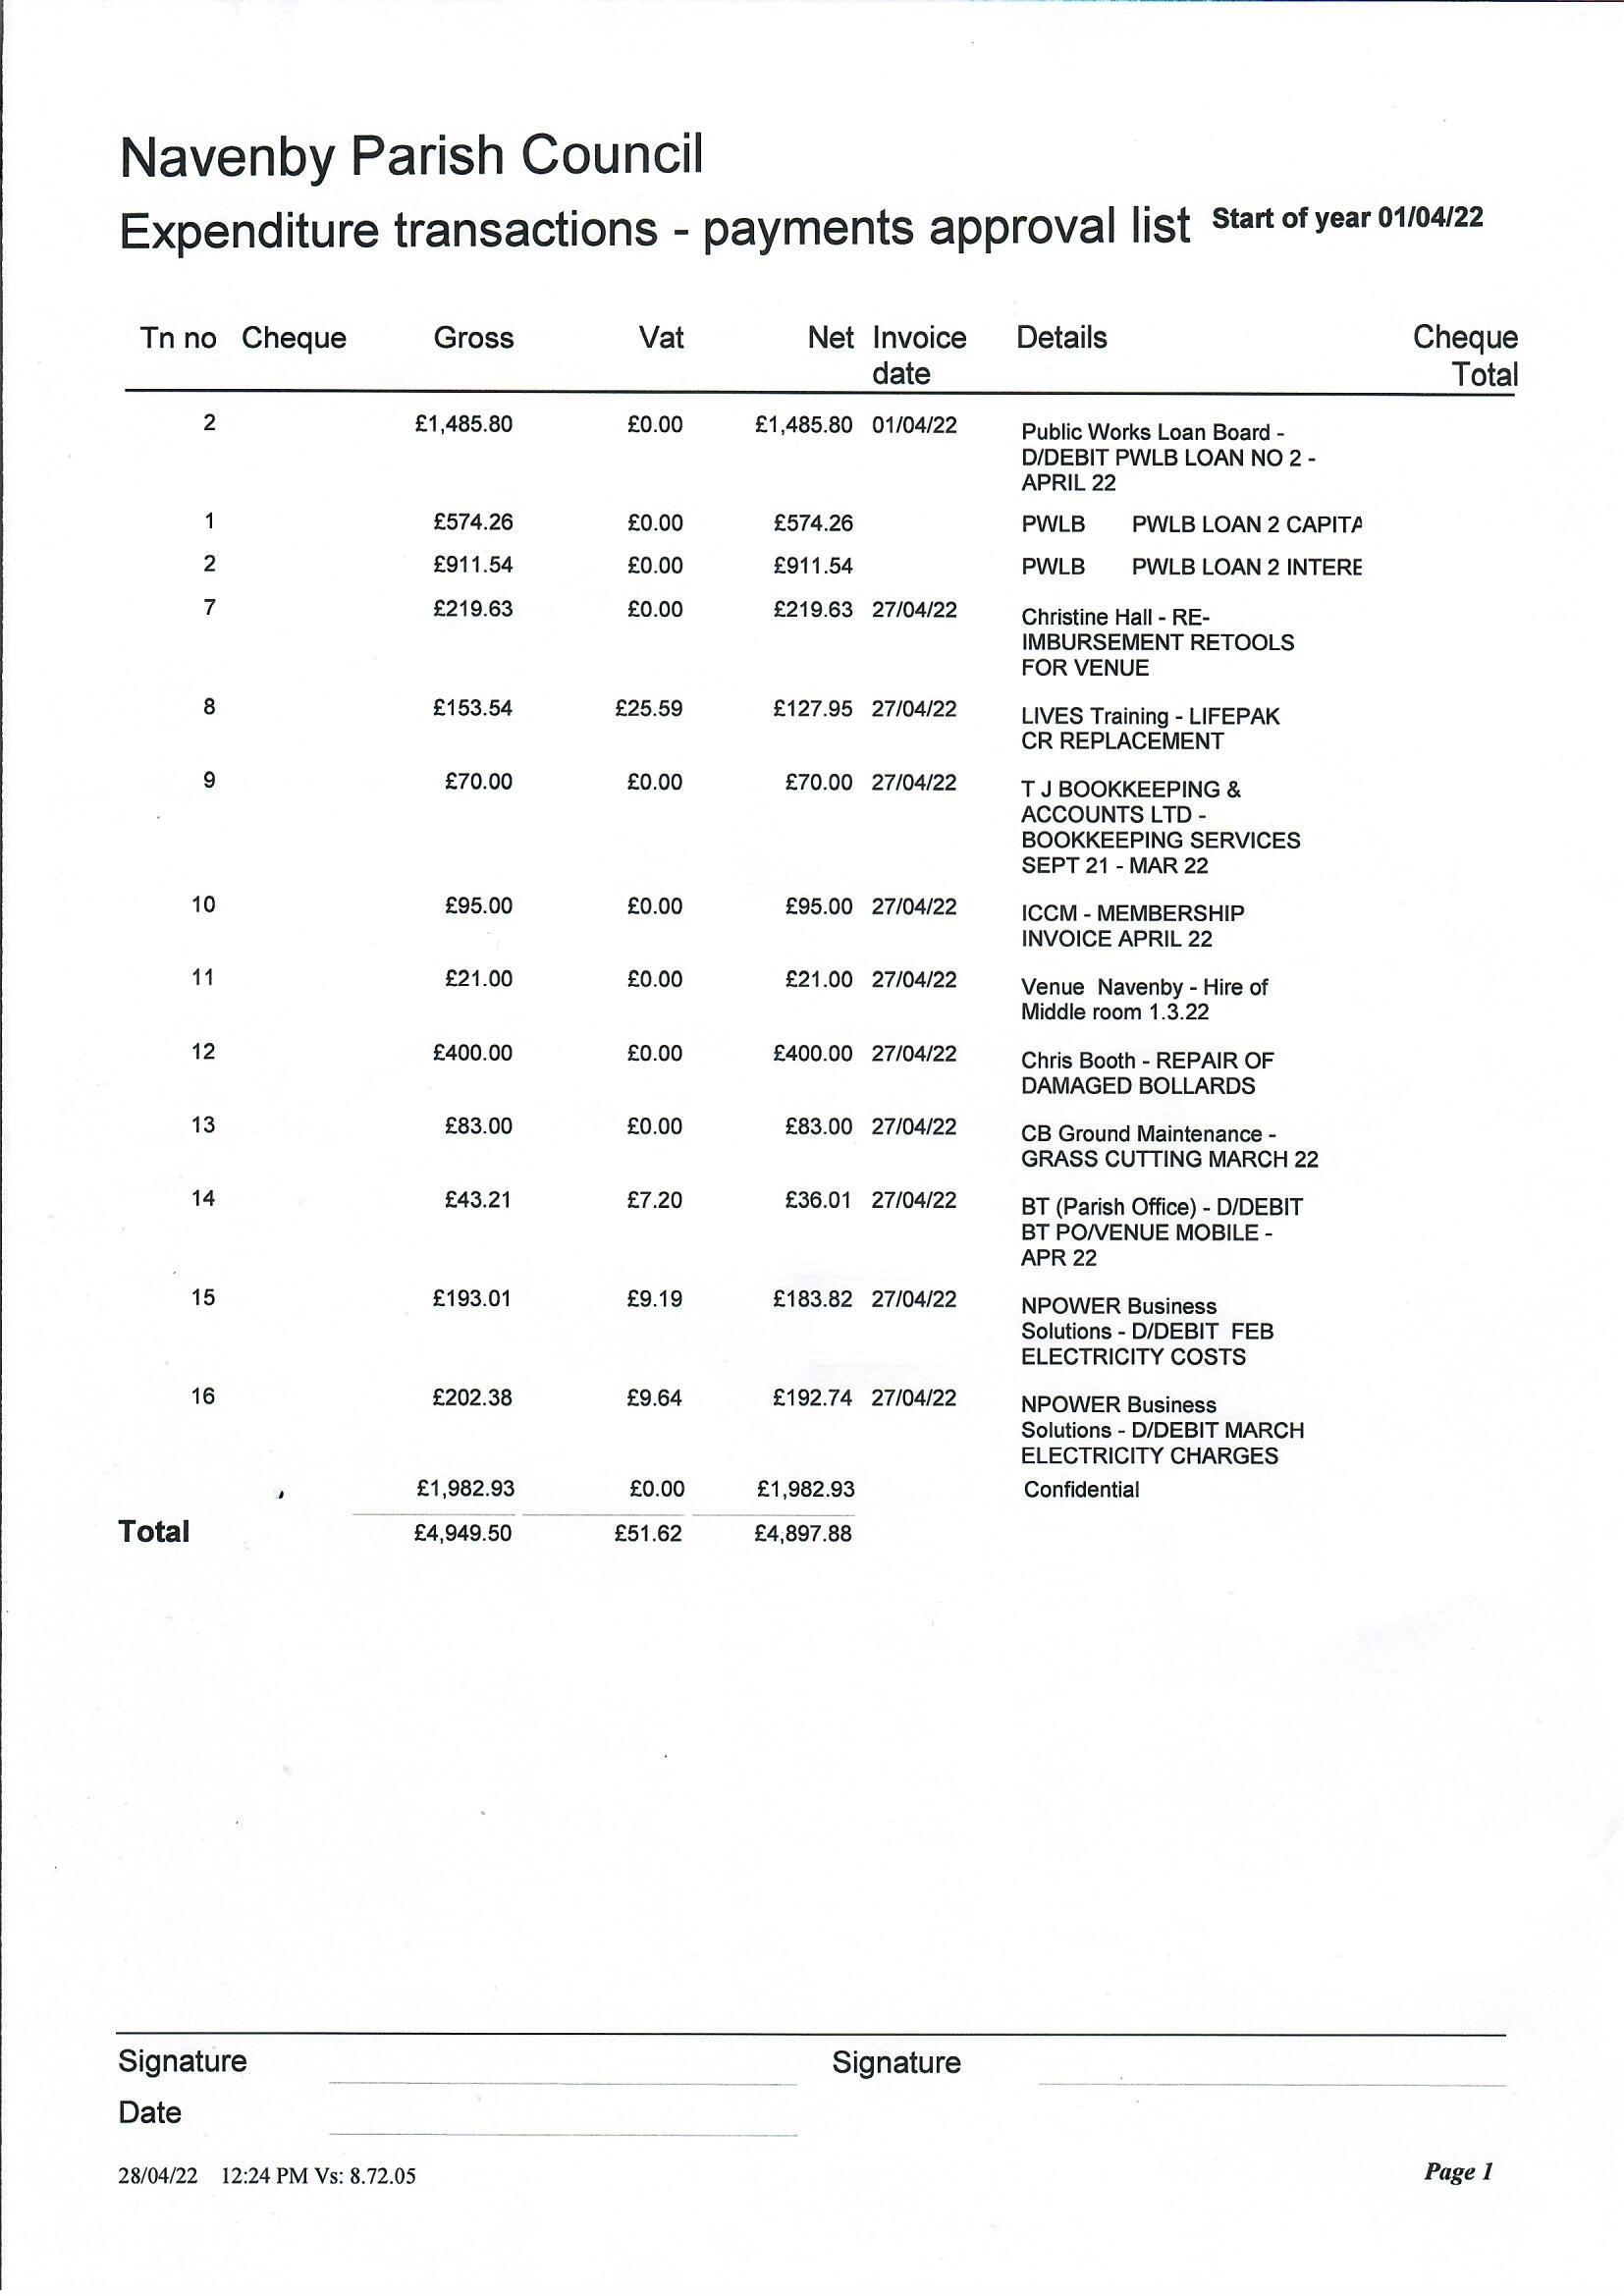 Expenditure approvals for 3 may 22 meeting page 1